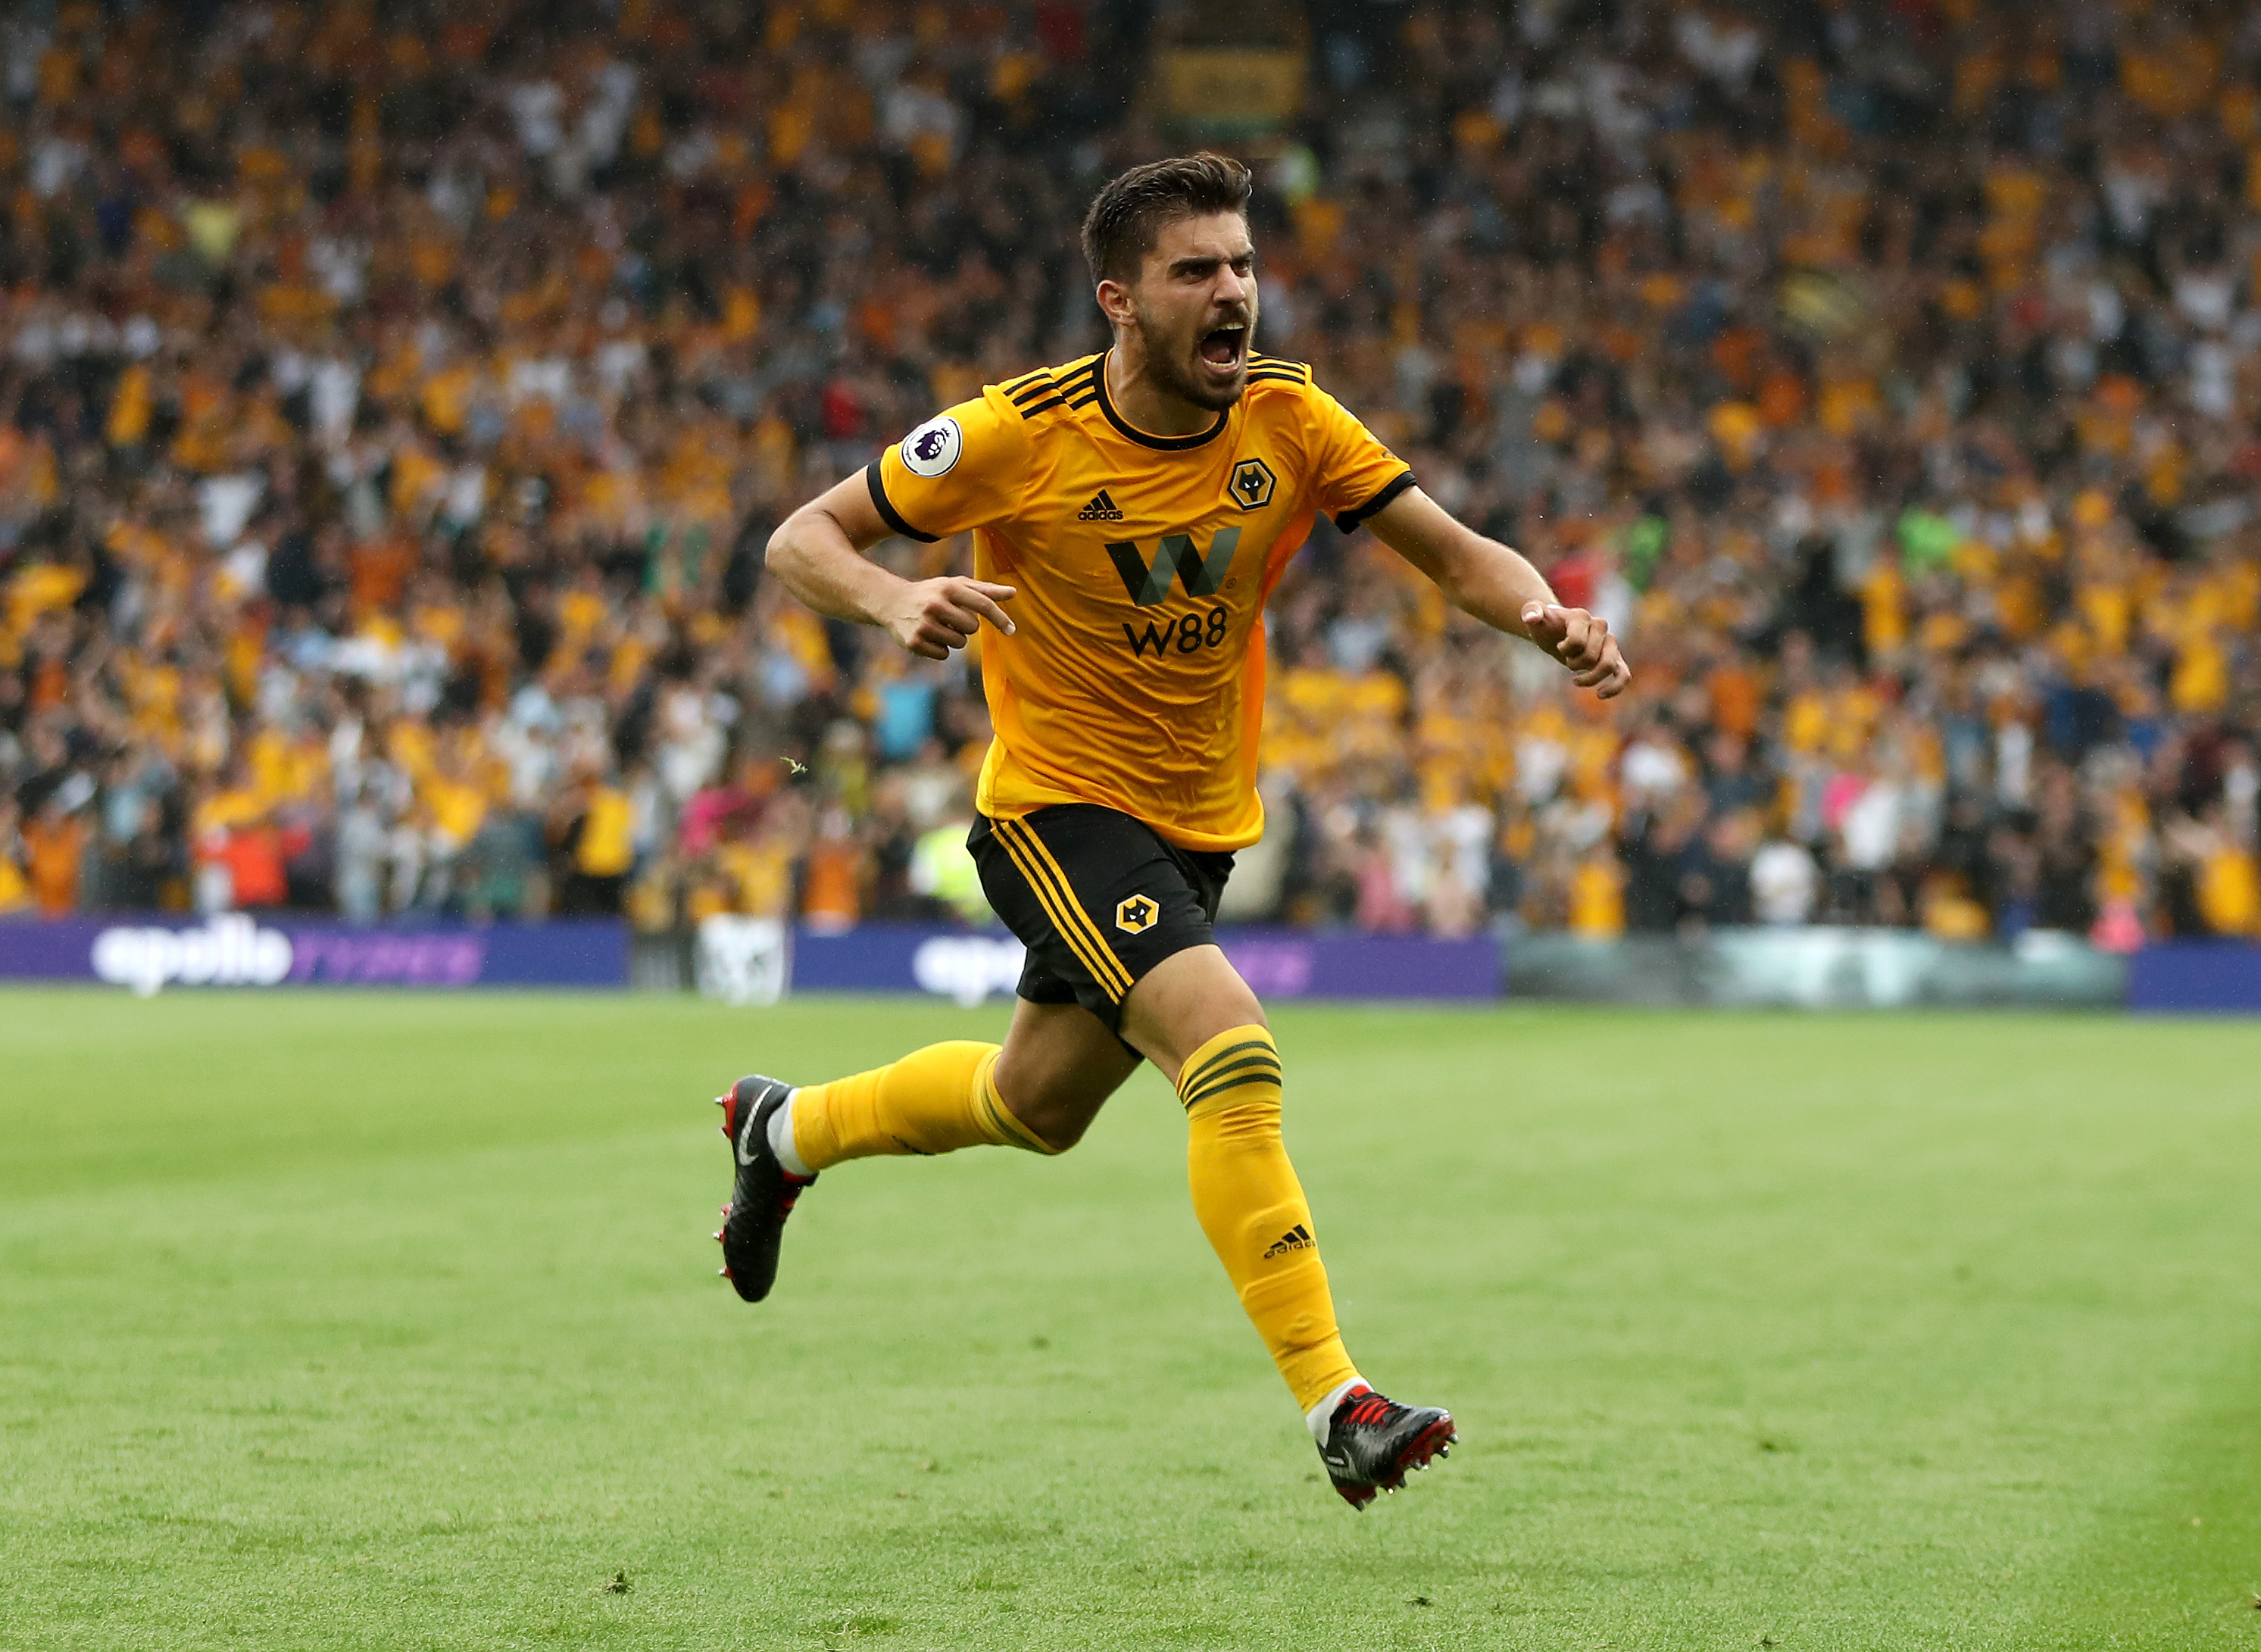 WOLVERHAMPTON, ENGLAND - AUGUST 11:  Ruben Neves of Wolverhampton Wanderers celebrates after scoring his team's first goal during the Premier League match between Wolverhampton Wanderers and Everton FC at Molineux on August 11, 2018 in Wolverhampton, United Kingdom.  (Photo by David Rogers/Getty Images)